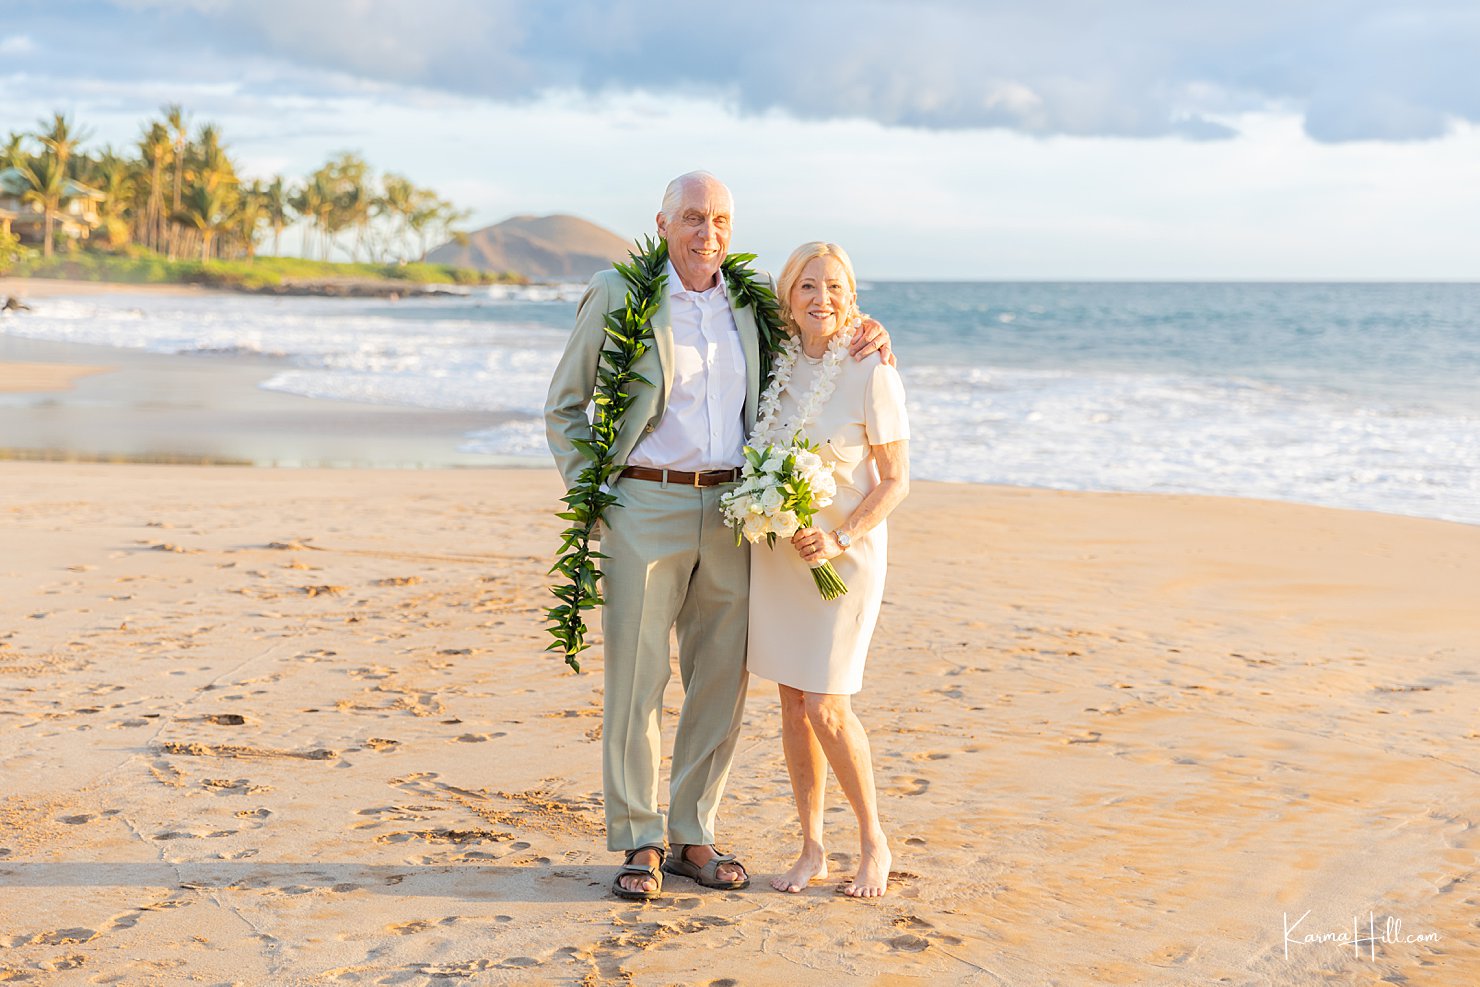 vow renewal on beach 